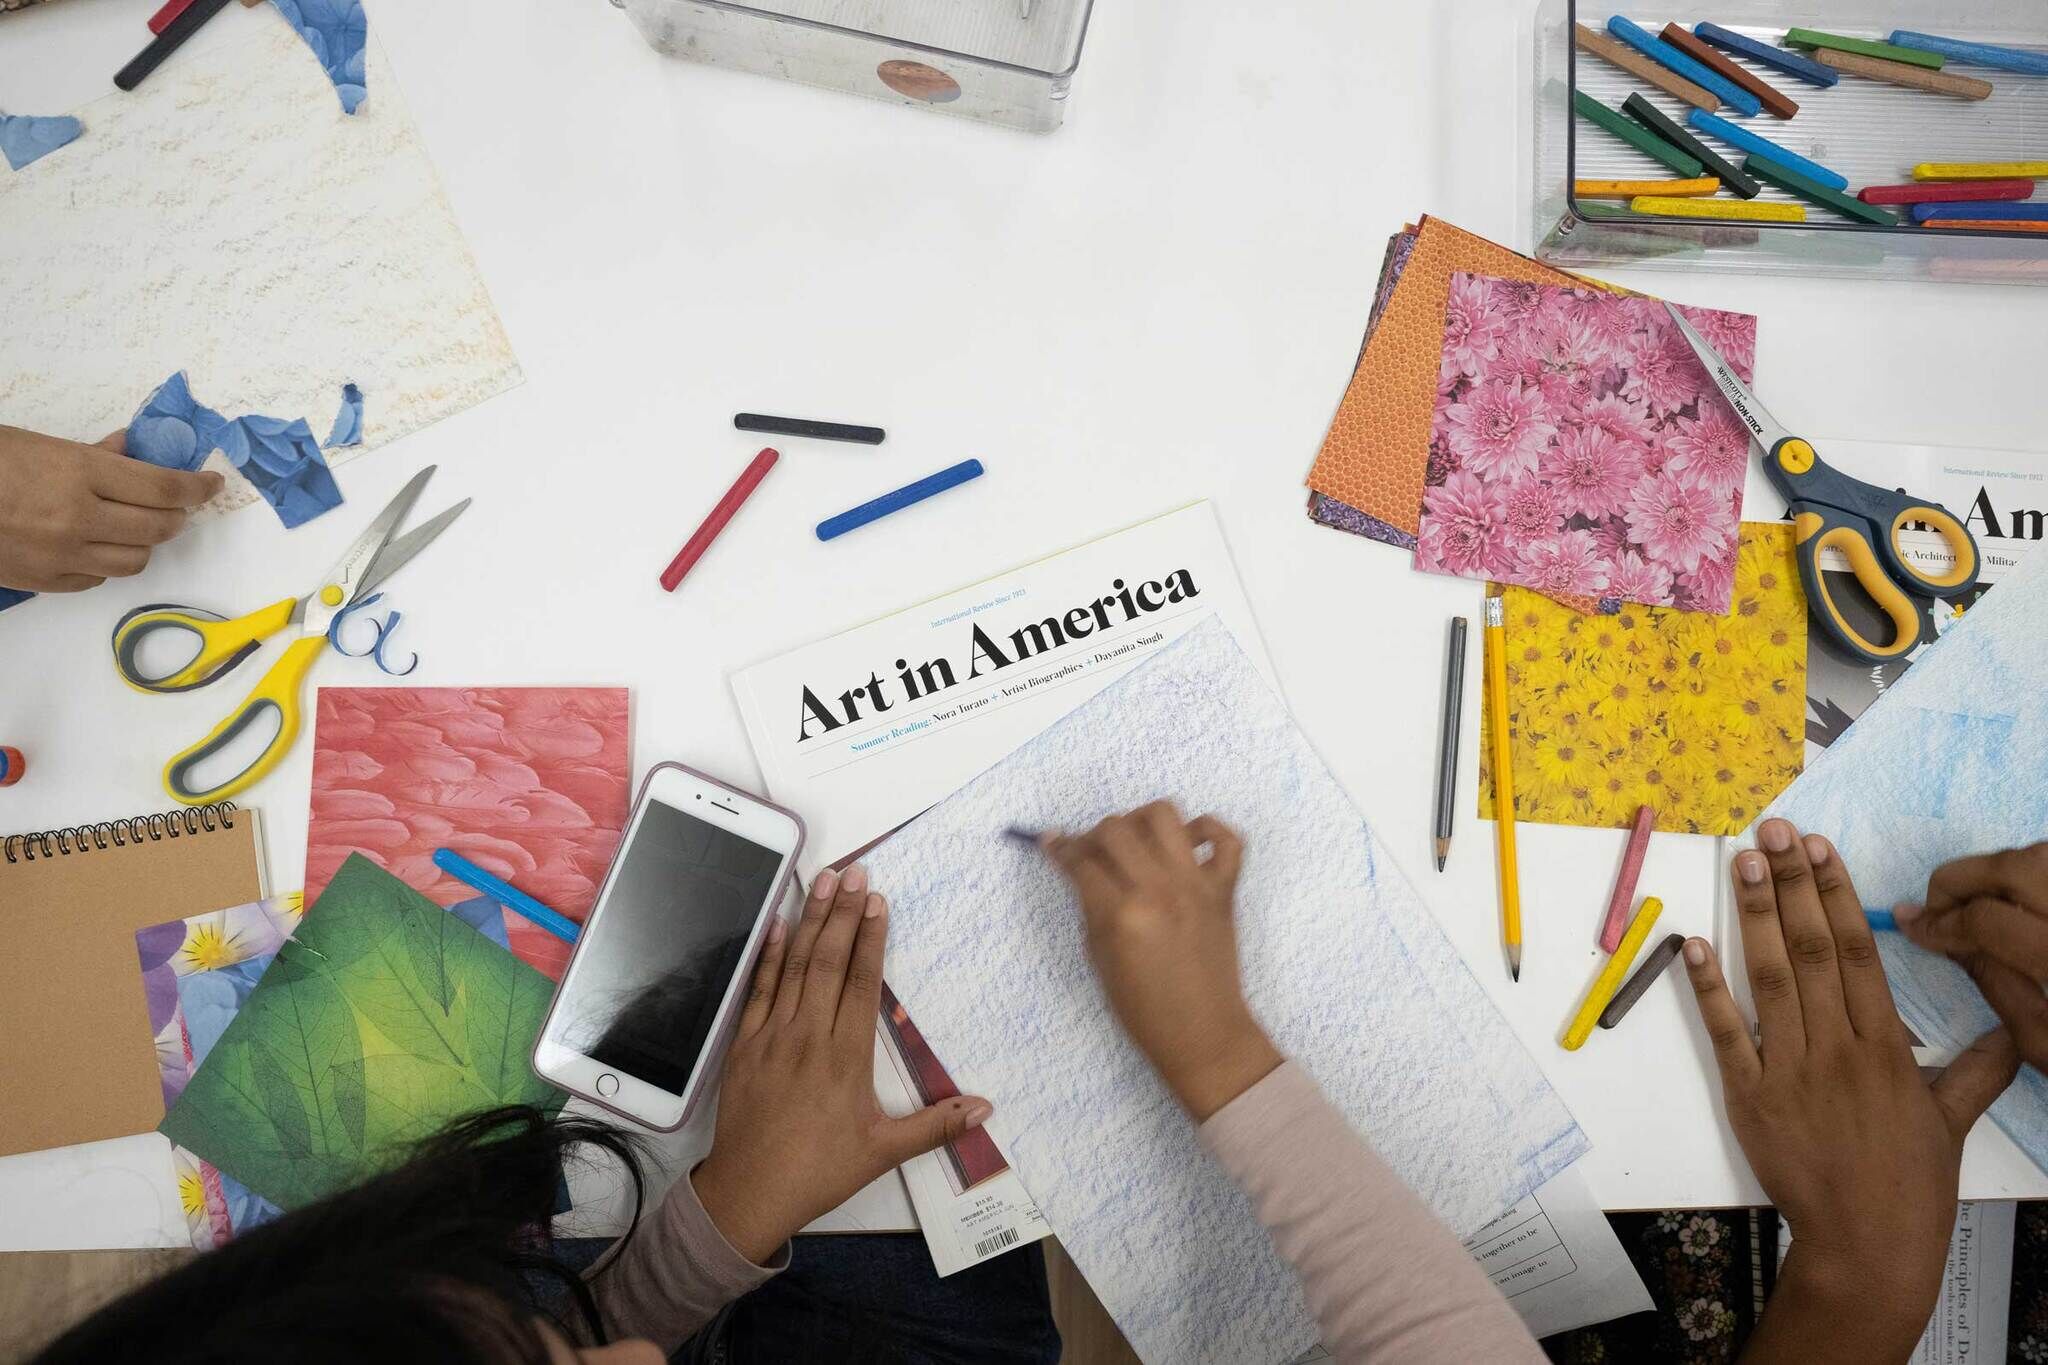 Numerous papers scatted on the paper, one reads 'Art in America.' Arms reach out to cut papers to create a collage.